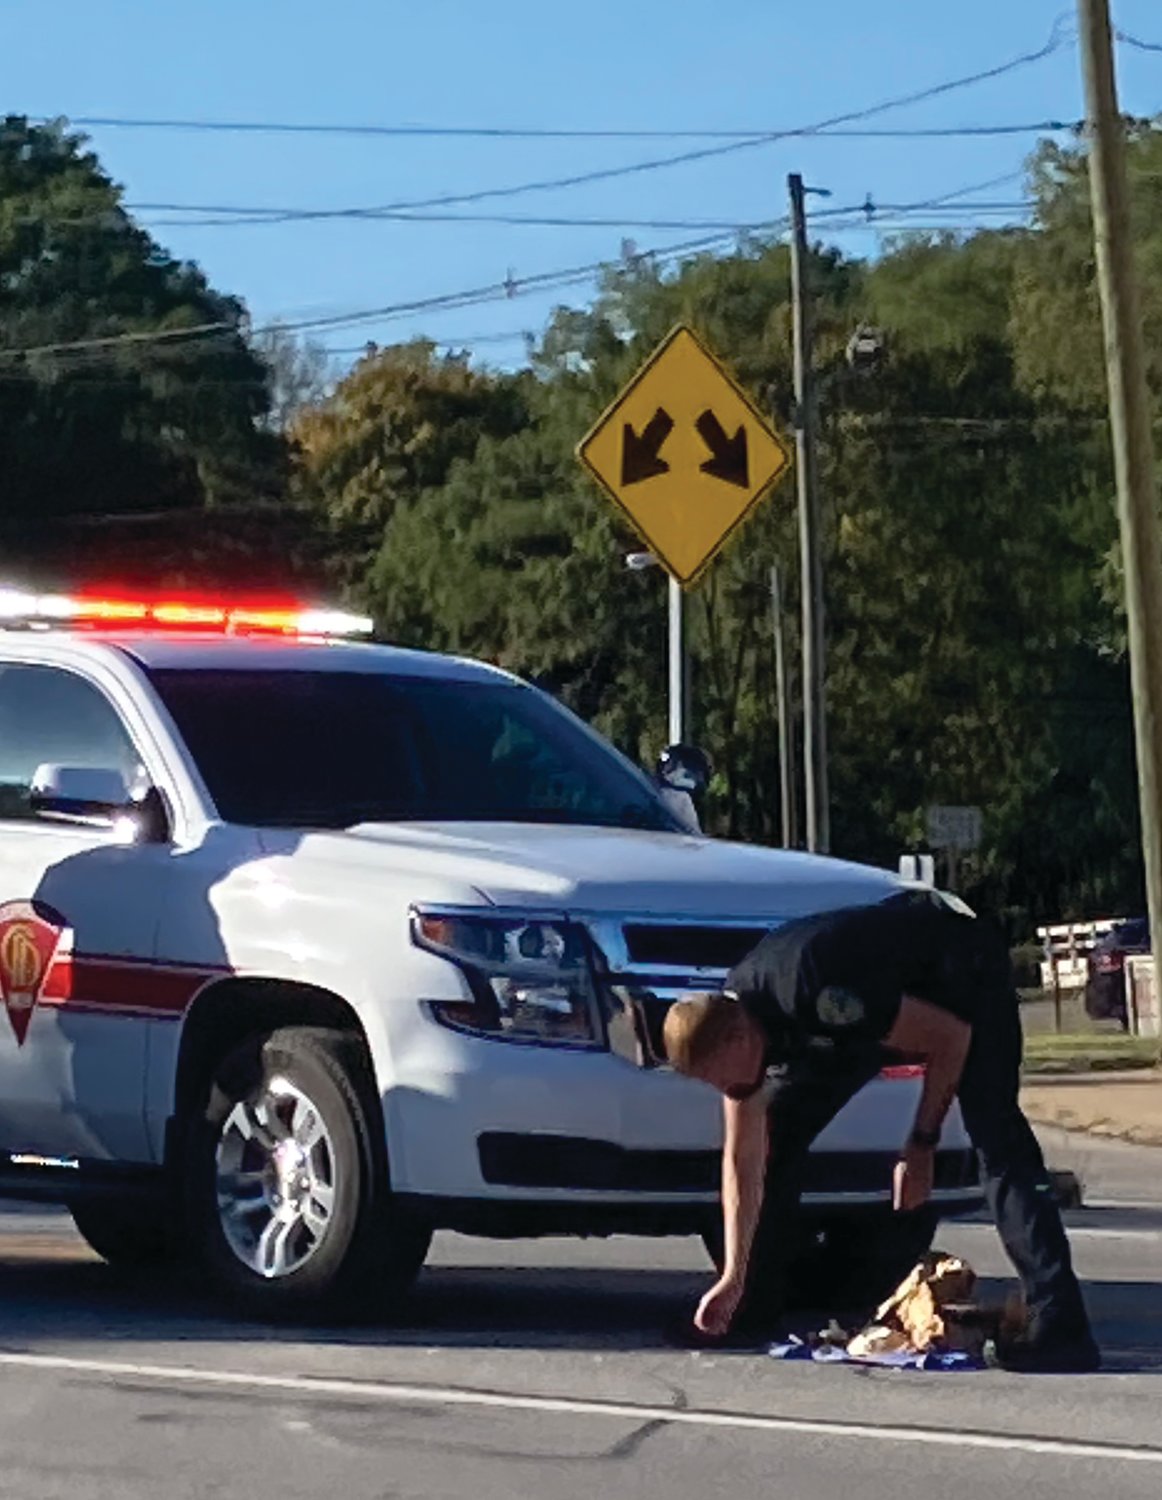 A Crawfordsville police officer gathers items from the roadway following a pedestrian crash involving a Crawfordsville Fire Department vehicle near downtown on Monday.